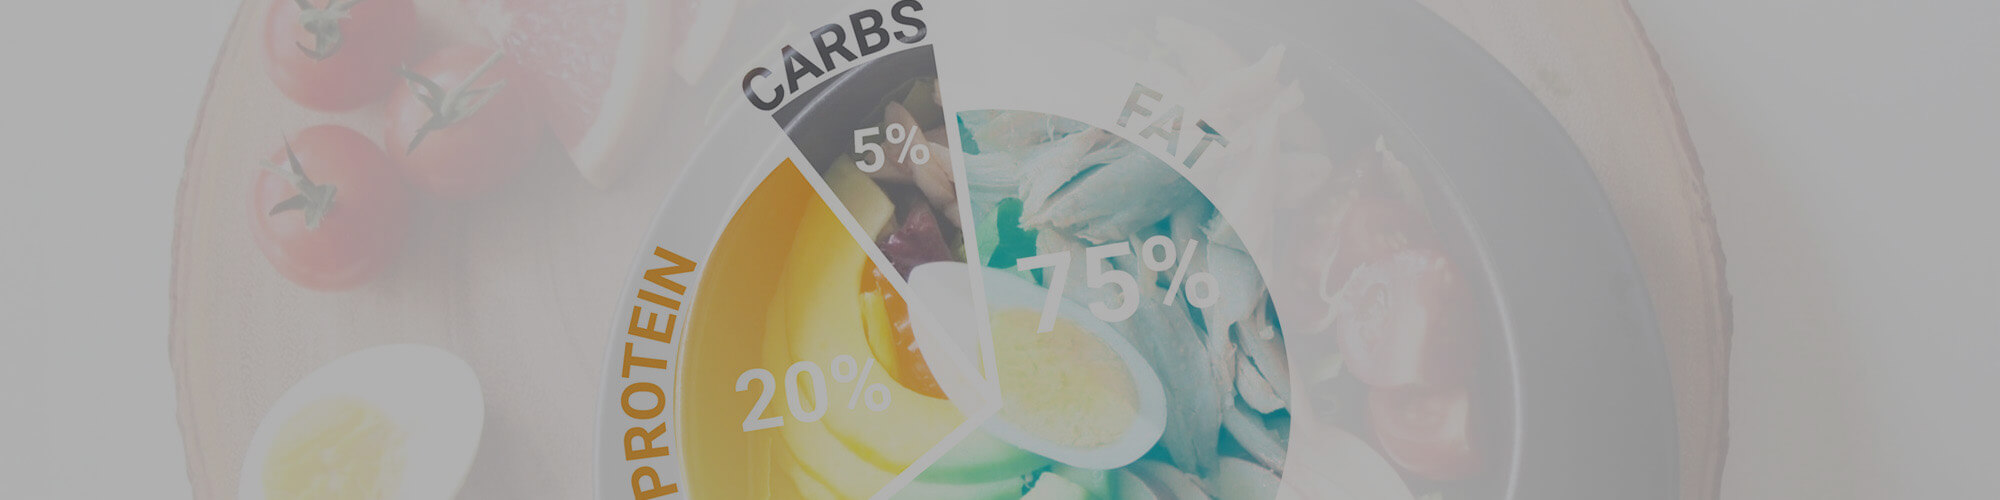 Macros & Calorie Counting